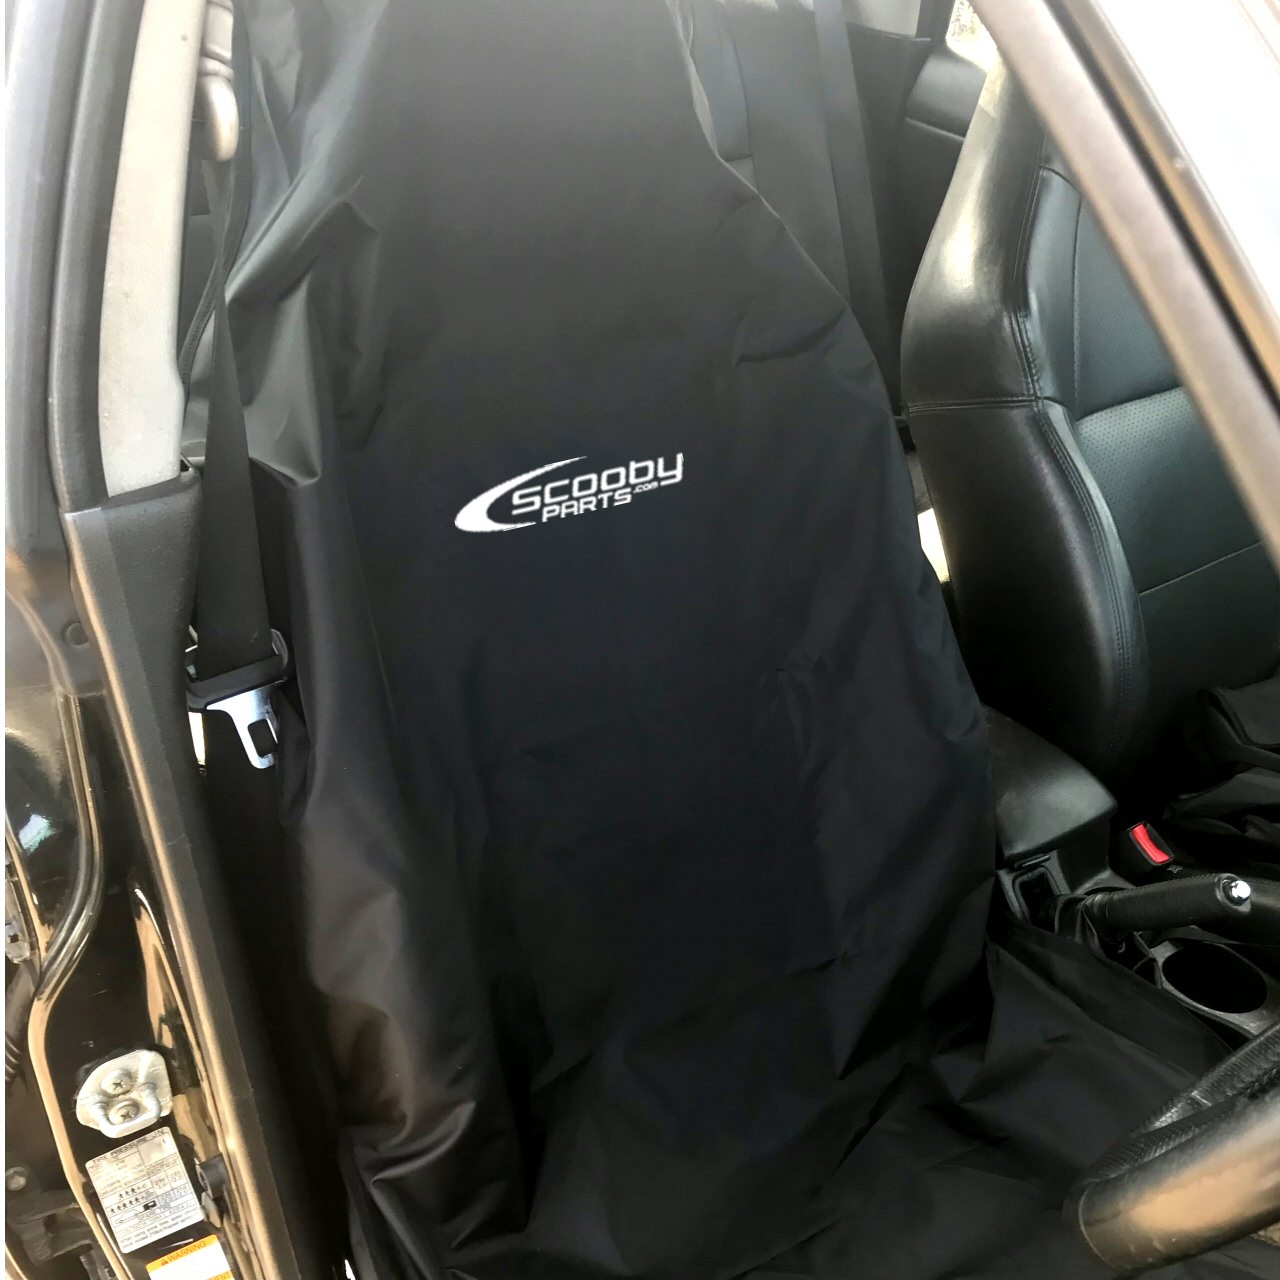 Airbag Compatible Seat Cover for Subaru Impreza, Legacy and Forester with Logo - Black_1